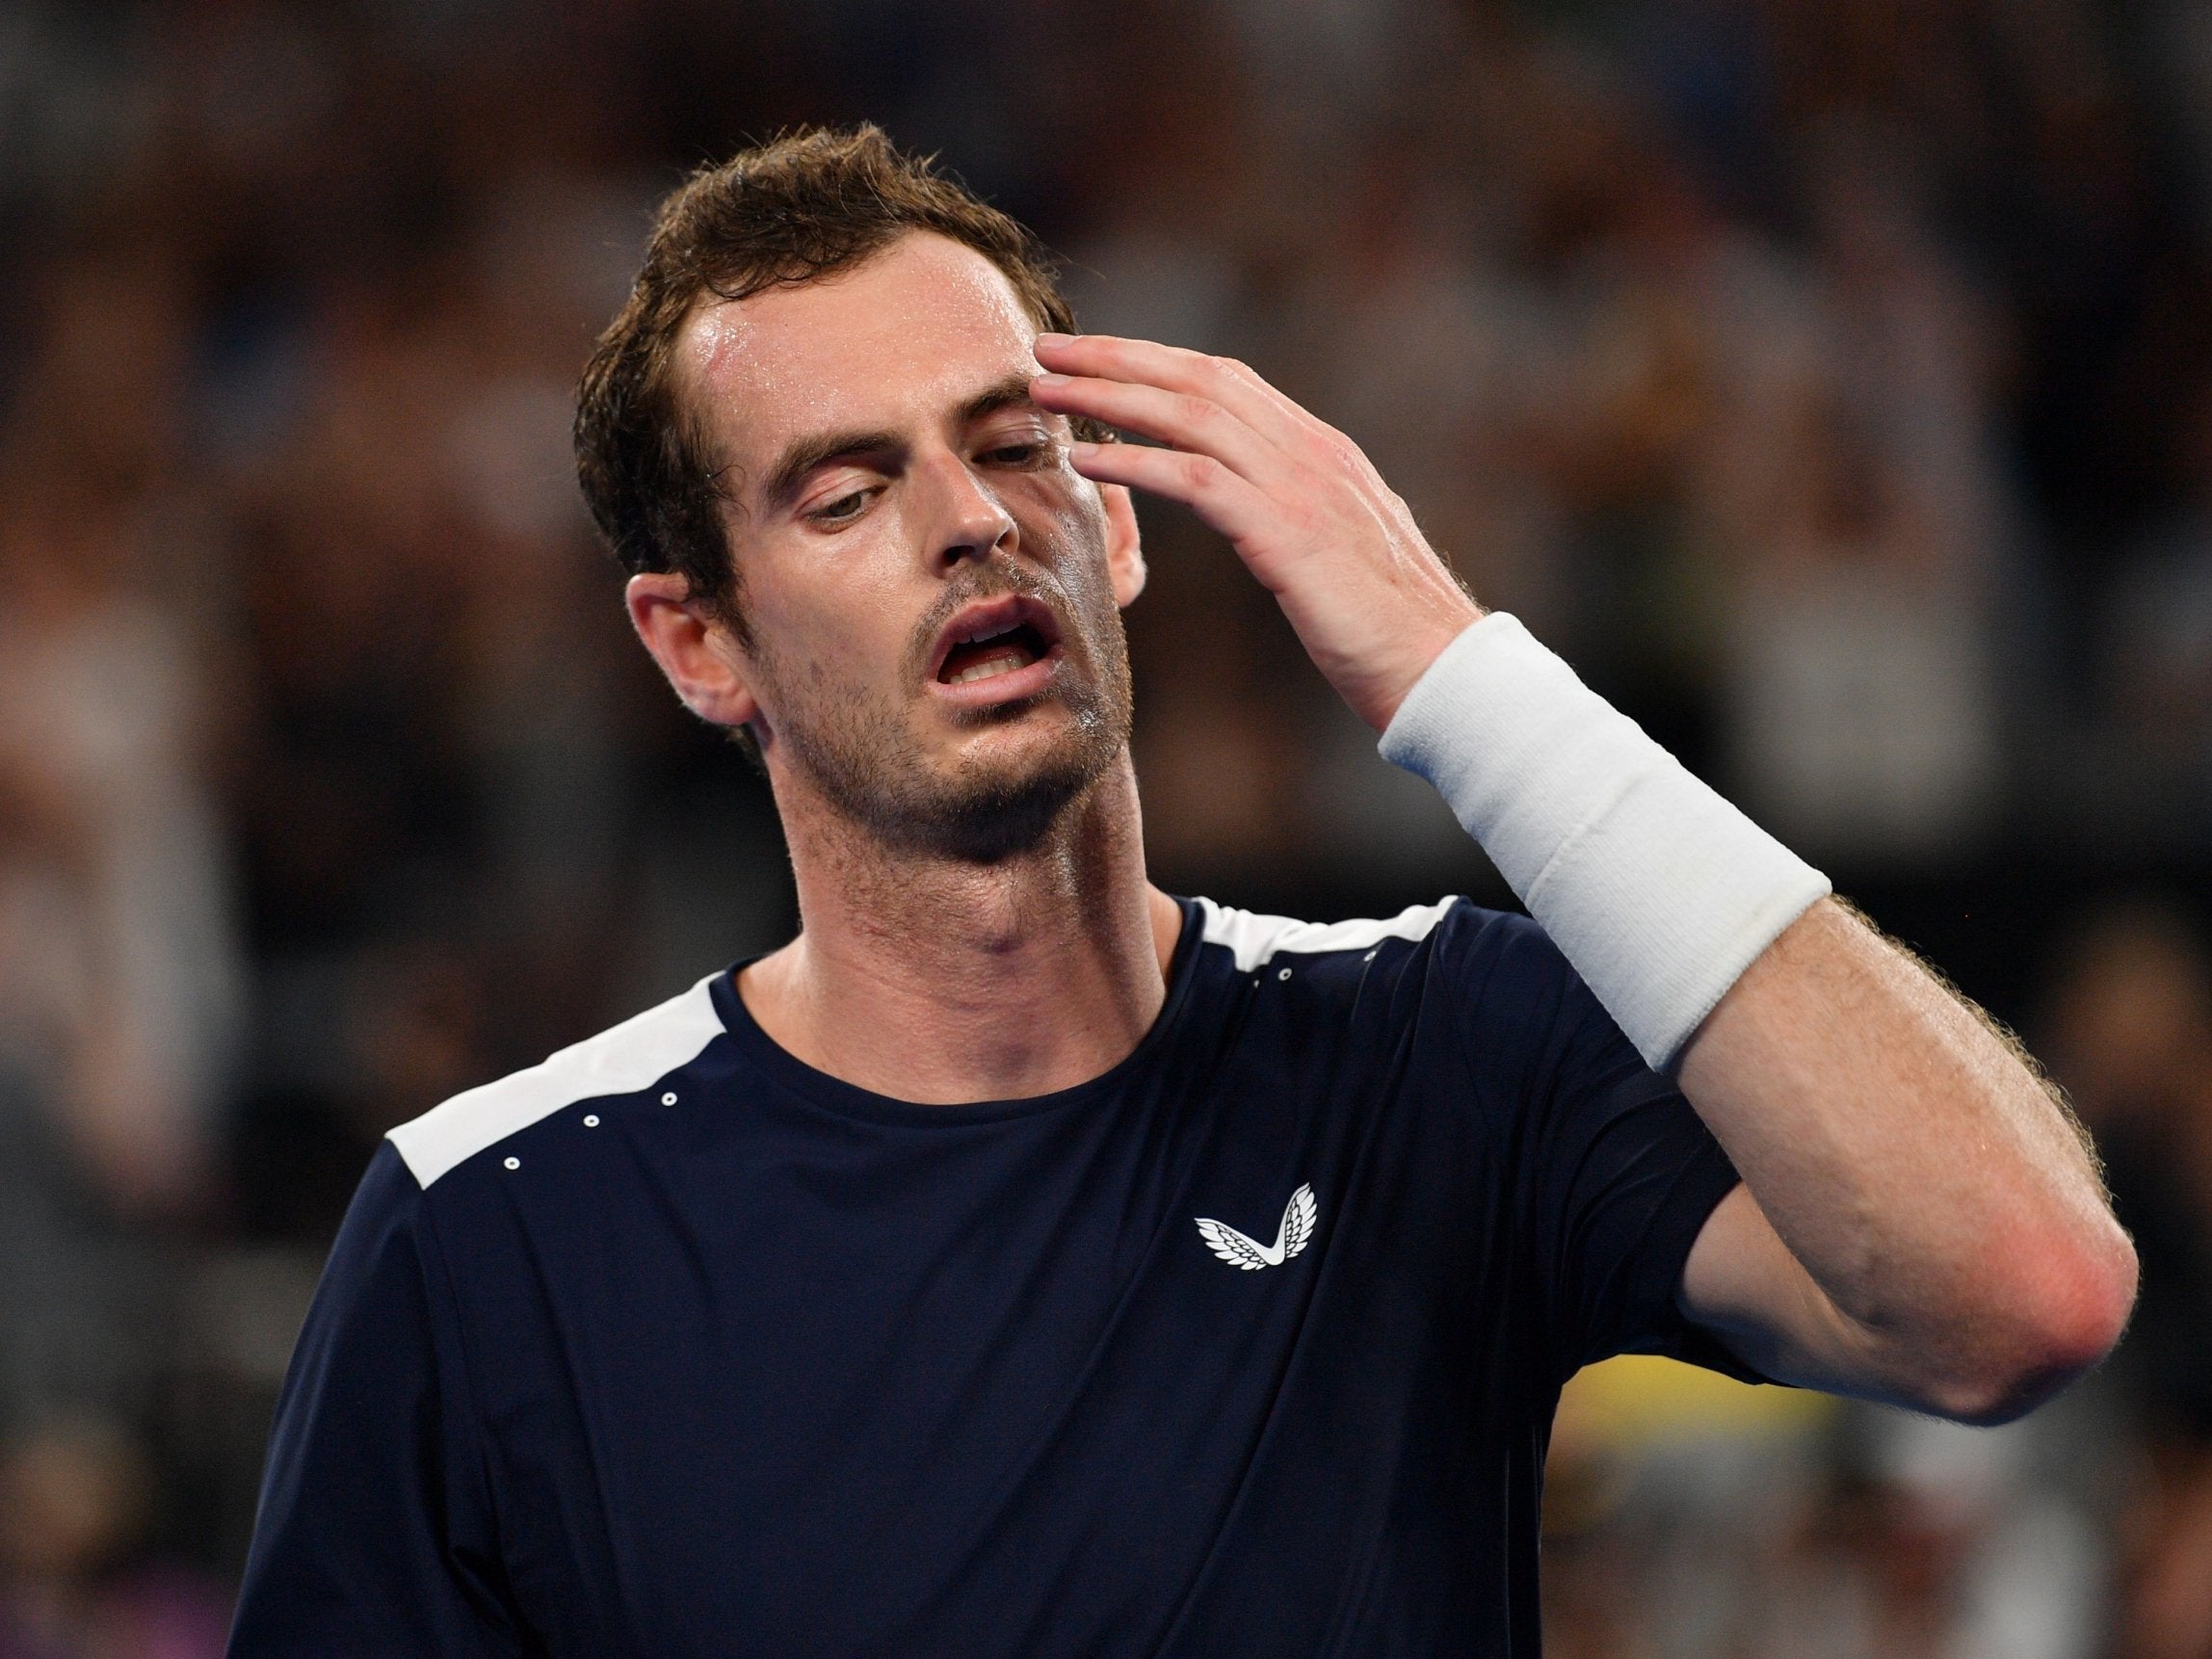 Andy Murray could have fresh surgery which would likely spell the end of his career